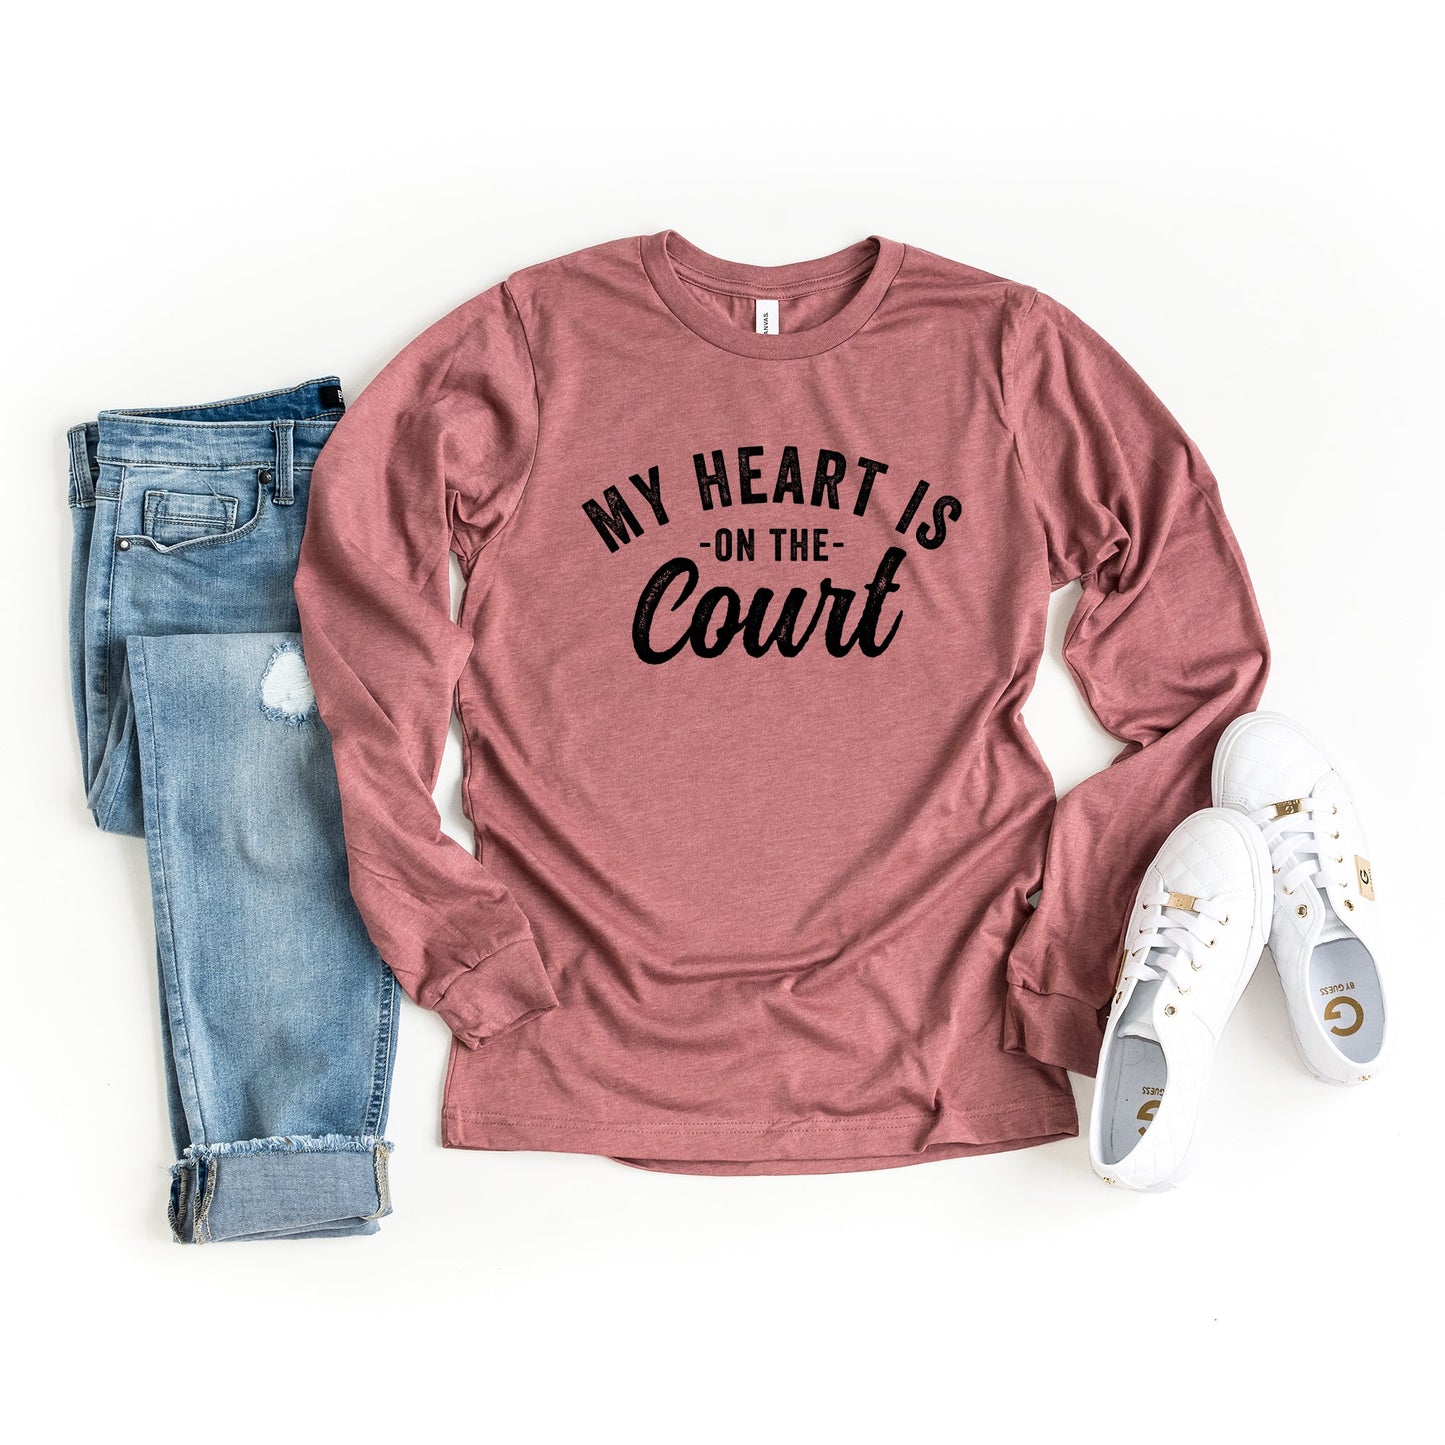 My Heart Is On The Court | Long Sleeve Crew Neck